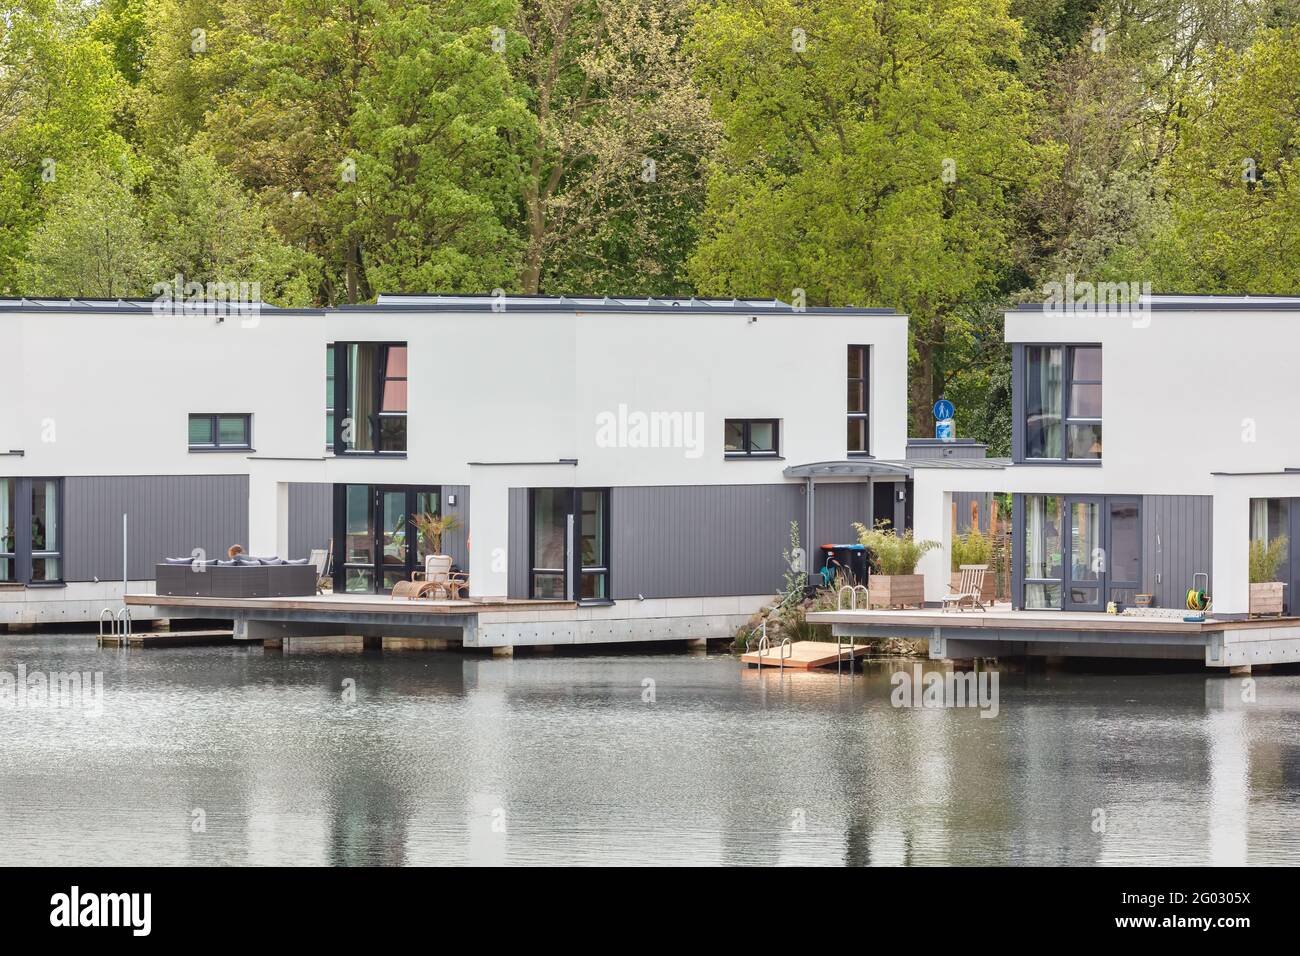 Deventer, The Netherlands - May 12, 2021: Row of contemporary floating house boats in Deventer, The Netherlands Stock Photo